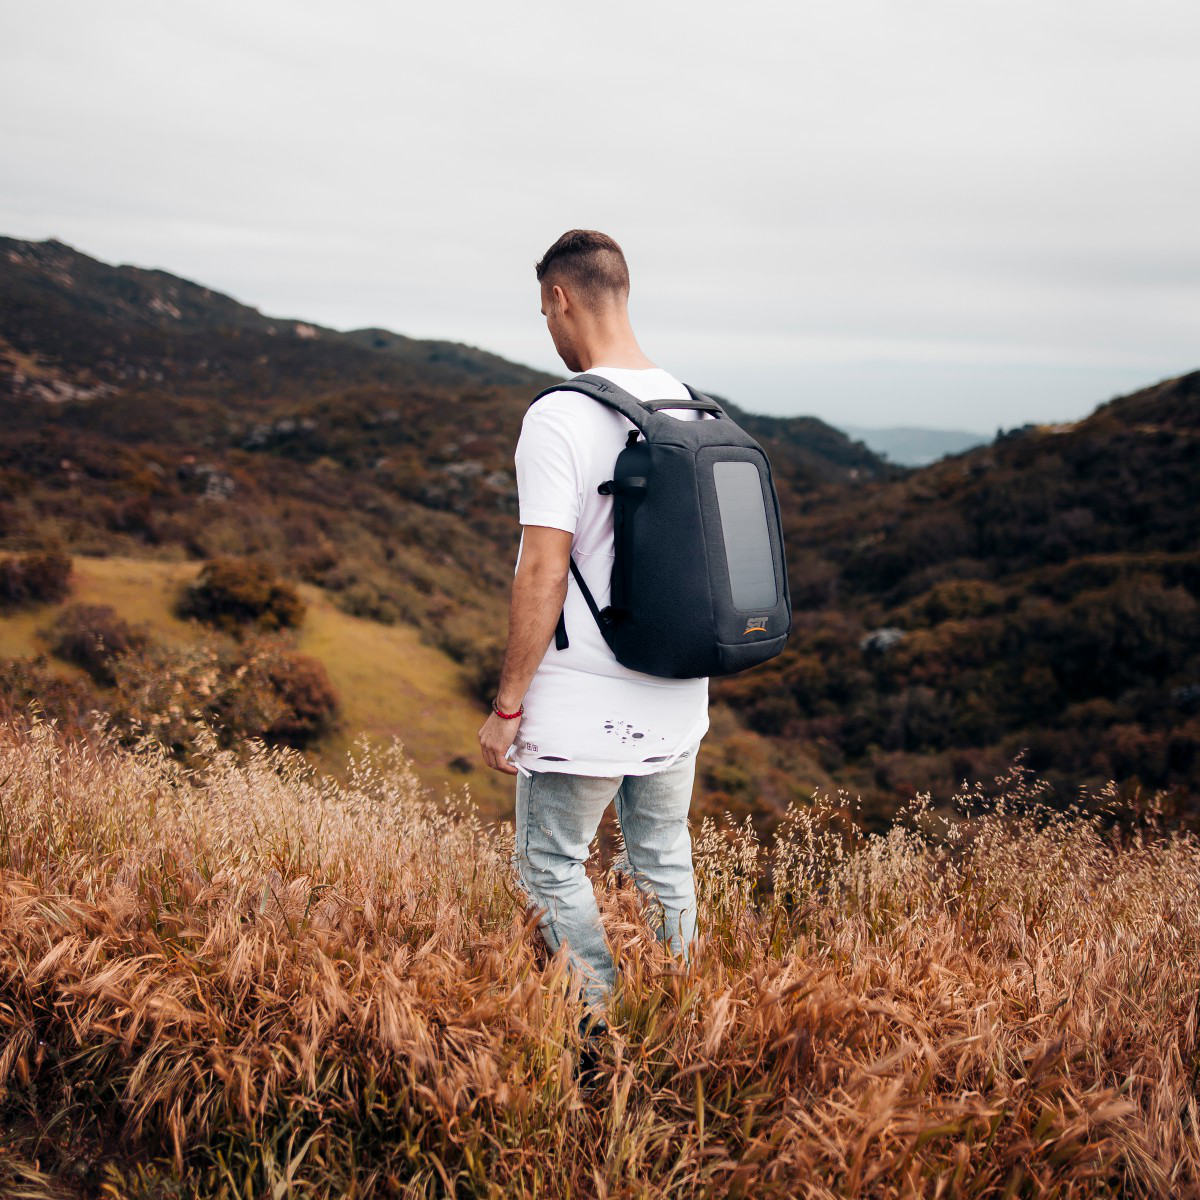 The numi pack <b>Smart Travel Backpack